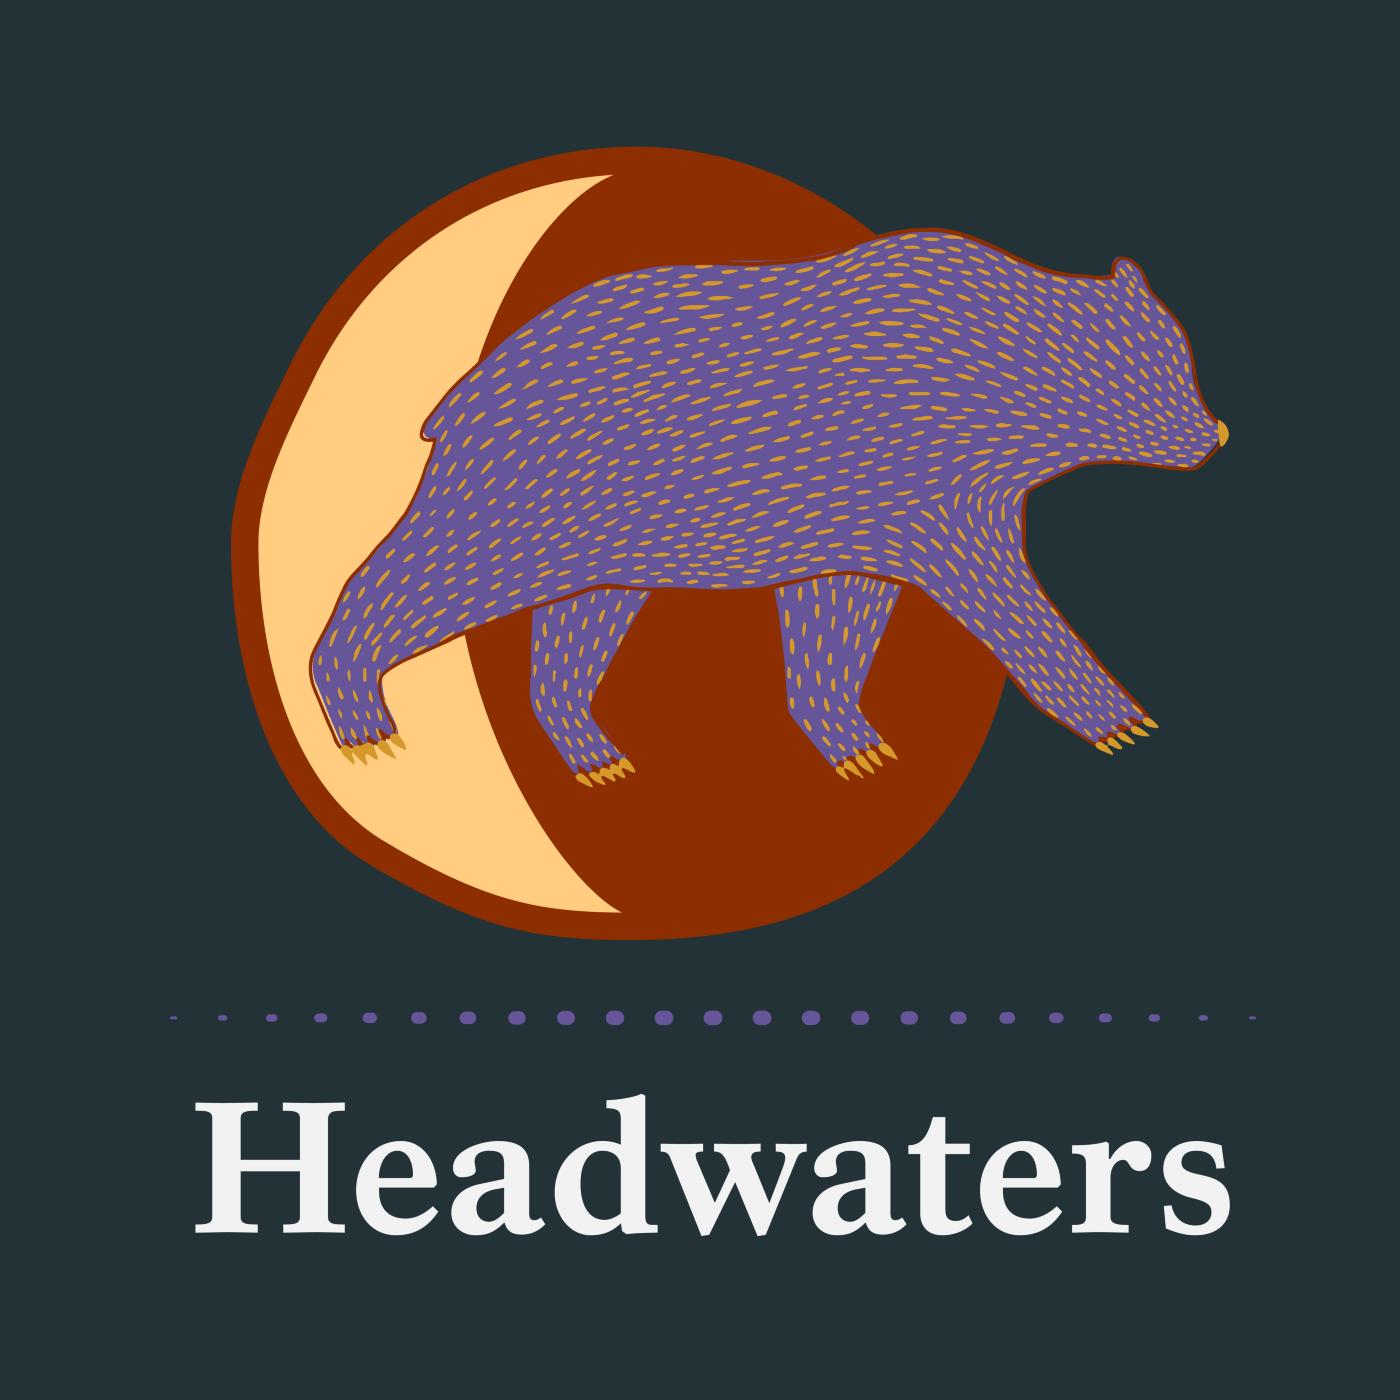 Headwaters (U.S. National Park Service)